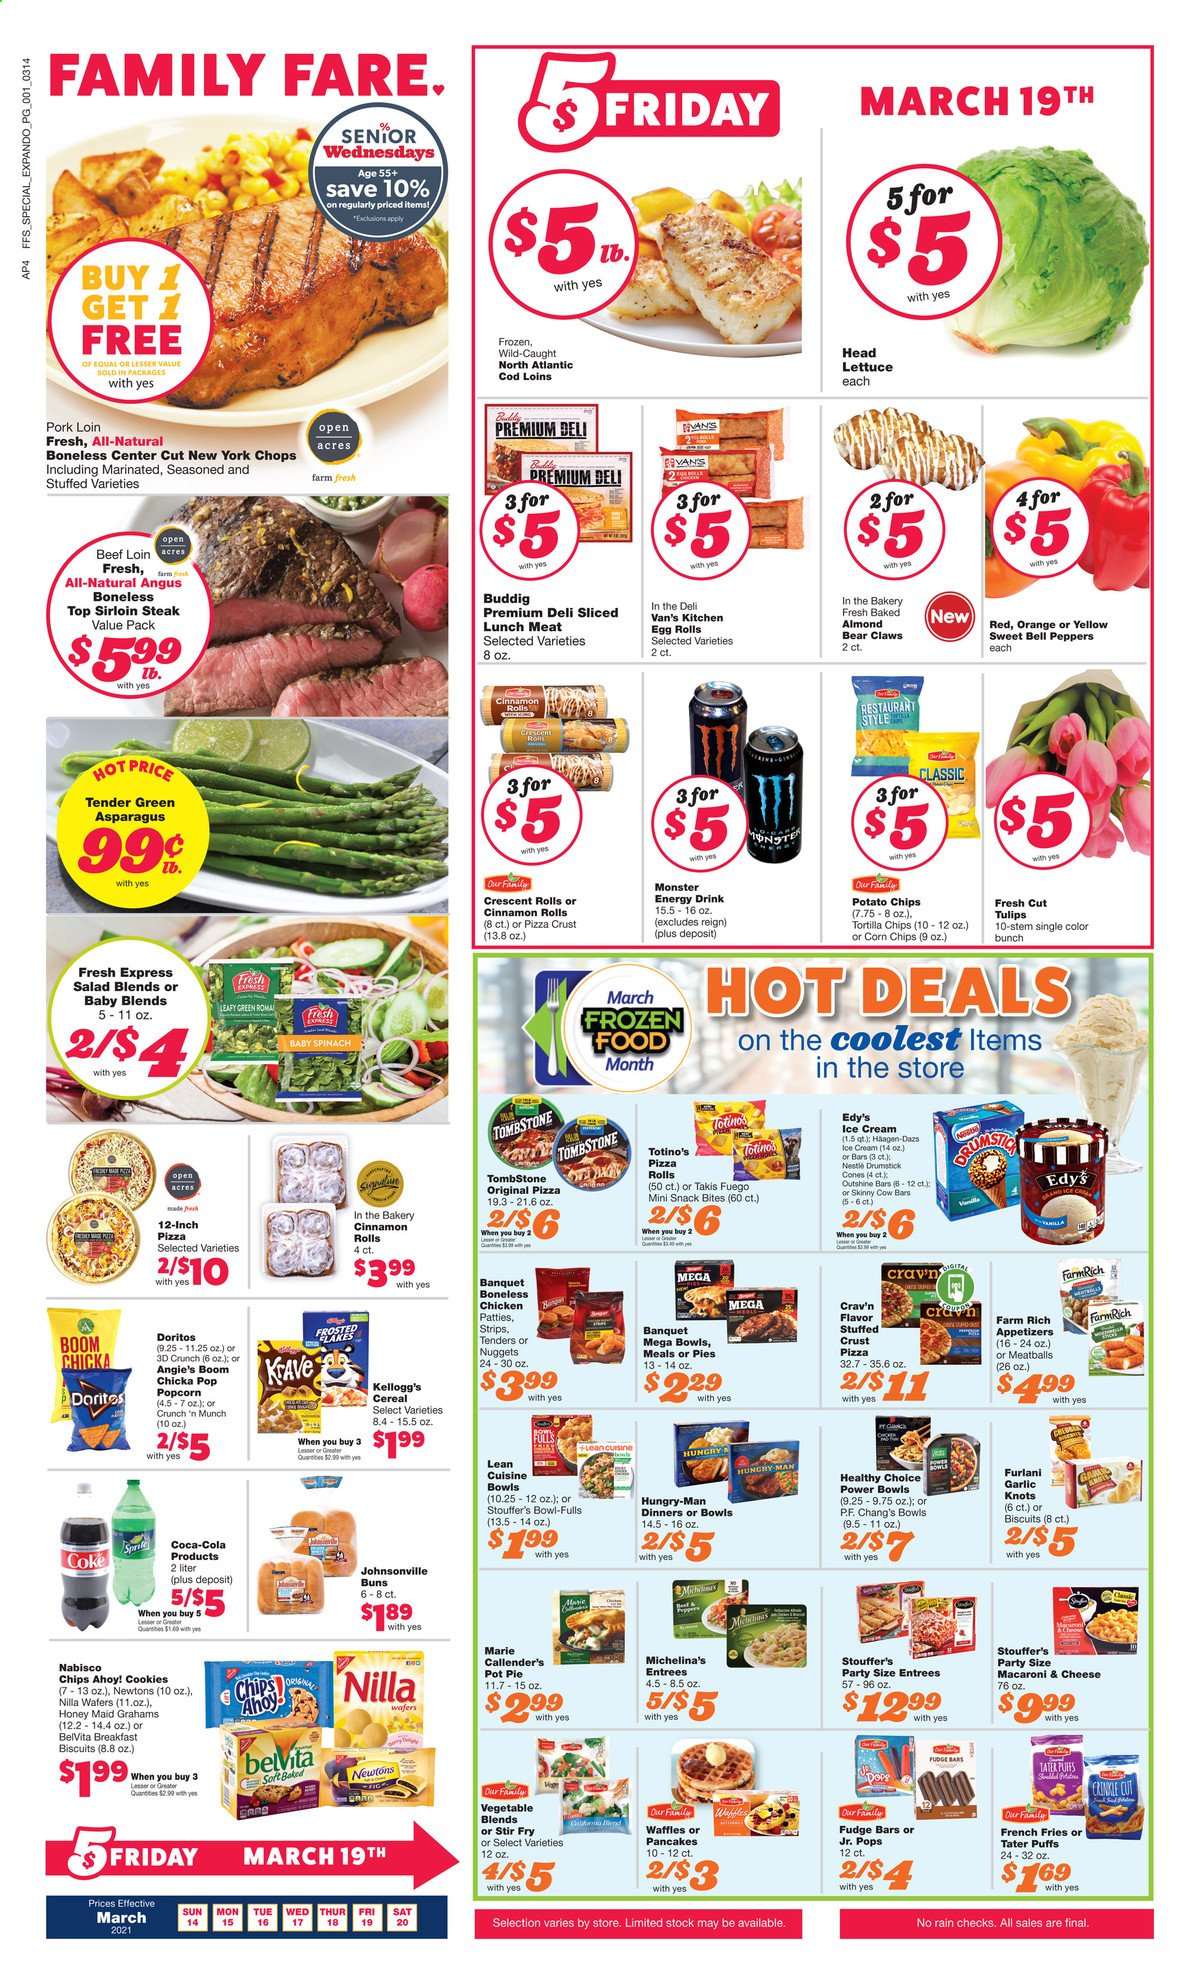 Family Fare Flyer - 03/14/2021 - 03/20/2021 - Sales products - bell peppers, lettuce, pizza rolls, rolls, Johnsonville, cinnamon rolls, crescent rolls, pot pie, Puffs, pie, pancake, buns, waffles, orange, cod, macaroni & cheese, pizza, meatballs, nuggets, salad, egg rolls, Healthy Choice, Marie Callender's, bowl-fulls, lunch meat, ice cream, Häagen-Dazs, spinach, strips, chicken patties, Stouffer's, potato fries, french fries, cookies, Fudge, wafers, Kellogg's, biscuit, Chips Ahoy!, Doritos, tortilla chips, potato chips, snack, corn chips, popcorn, garlic, cereals, belVita, Honey Maid, almonds, Coca-Cola, energy drink, Monster, Monster Energy, chicken, beef sirloin, steak, sirloin steak, pork loin, pork meat, Voom, pot, tulips. Page 1.